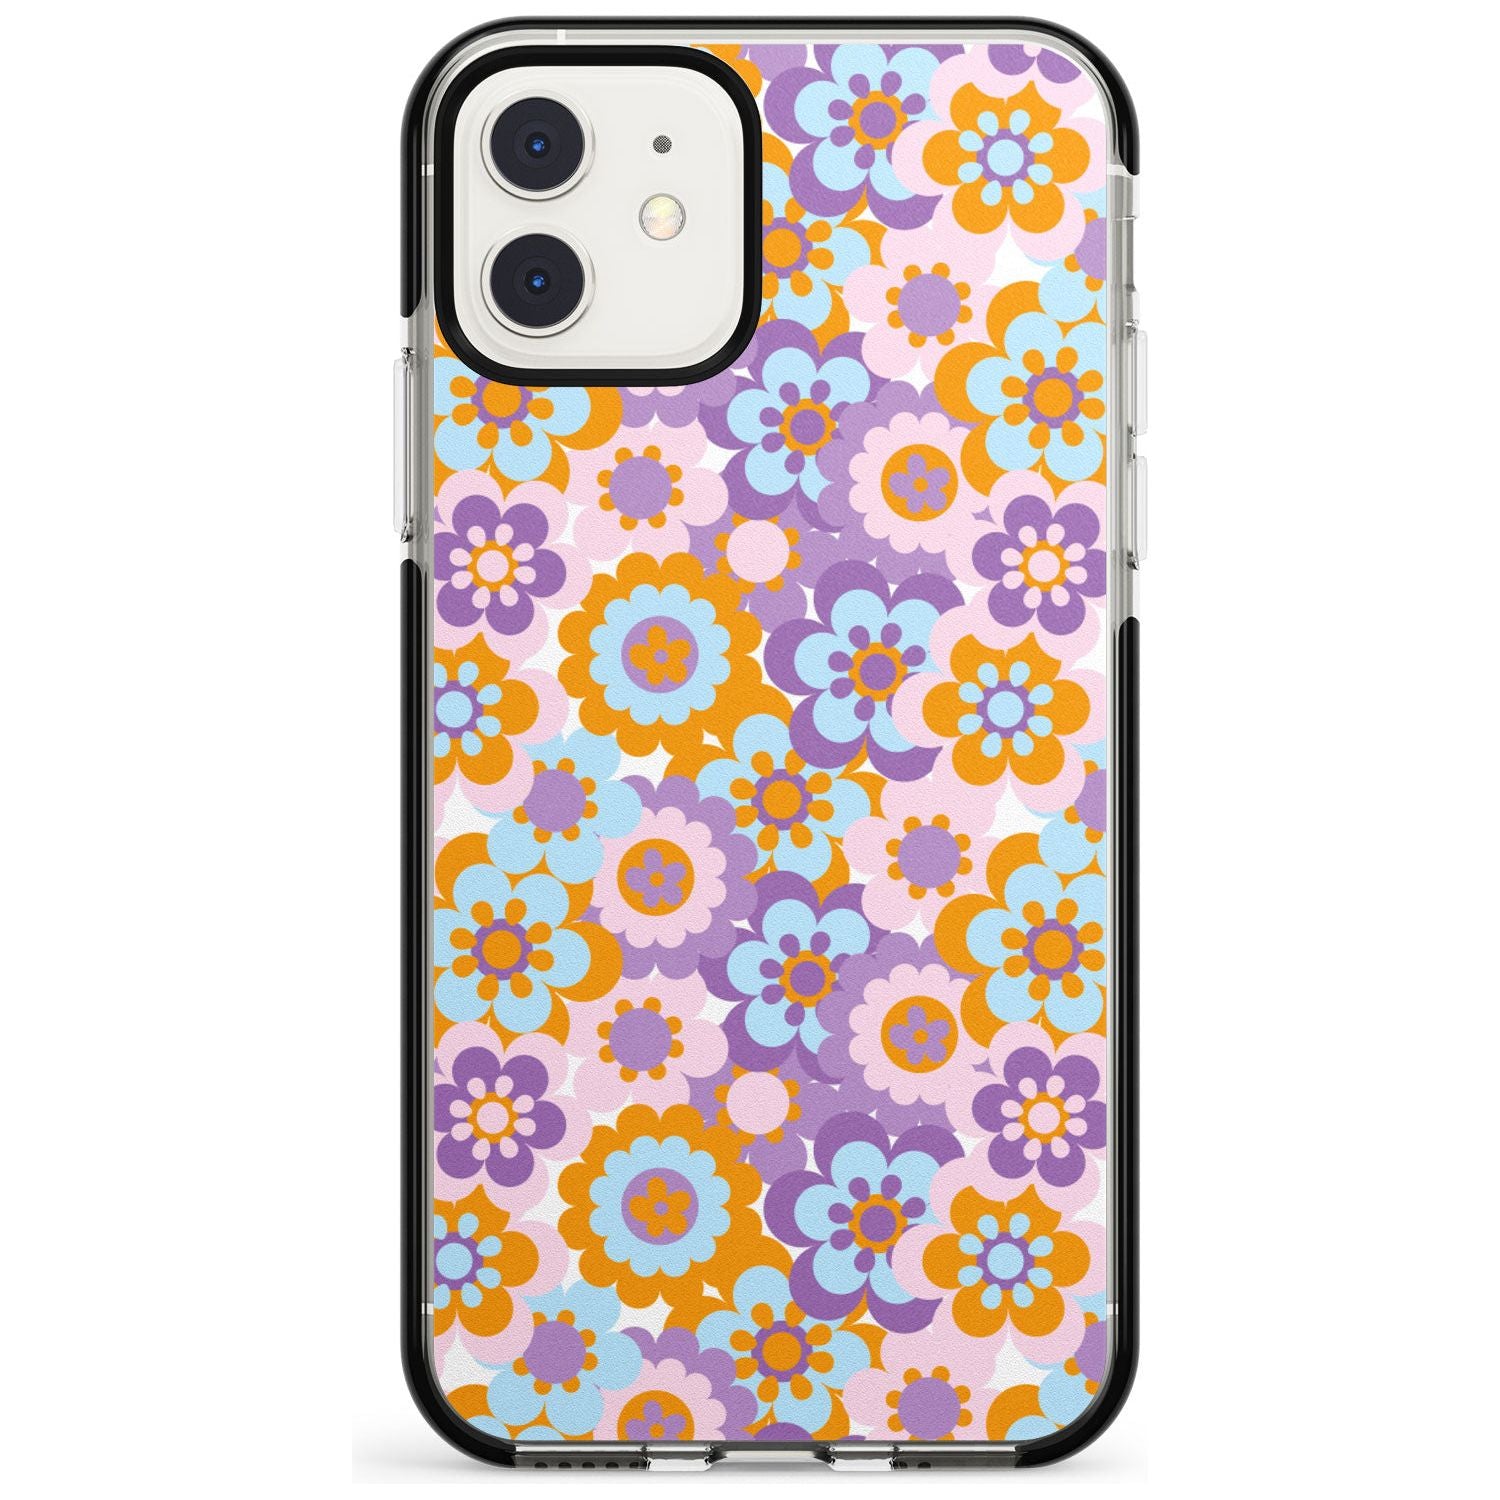 Flower Power Pattern Black Impact Phone Case for iPhone 11 Pro Max